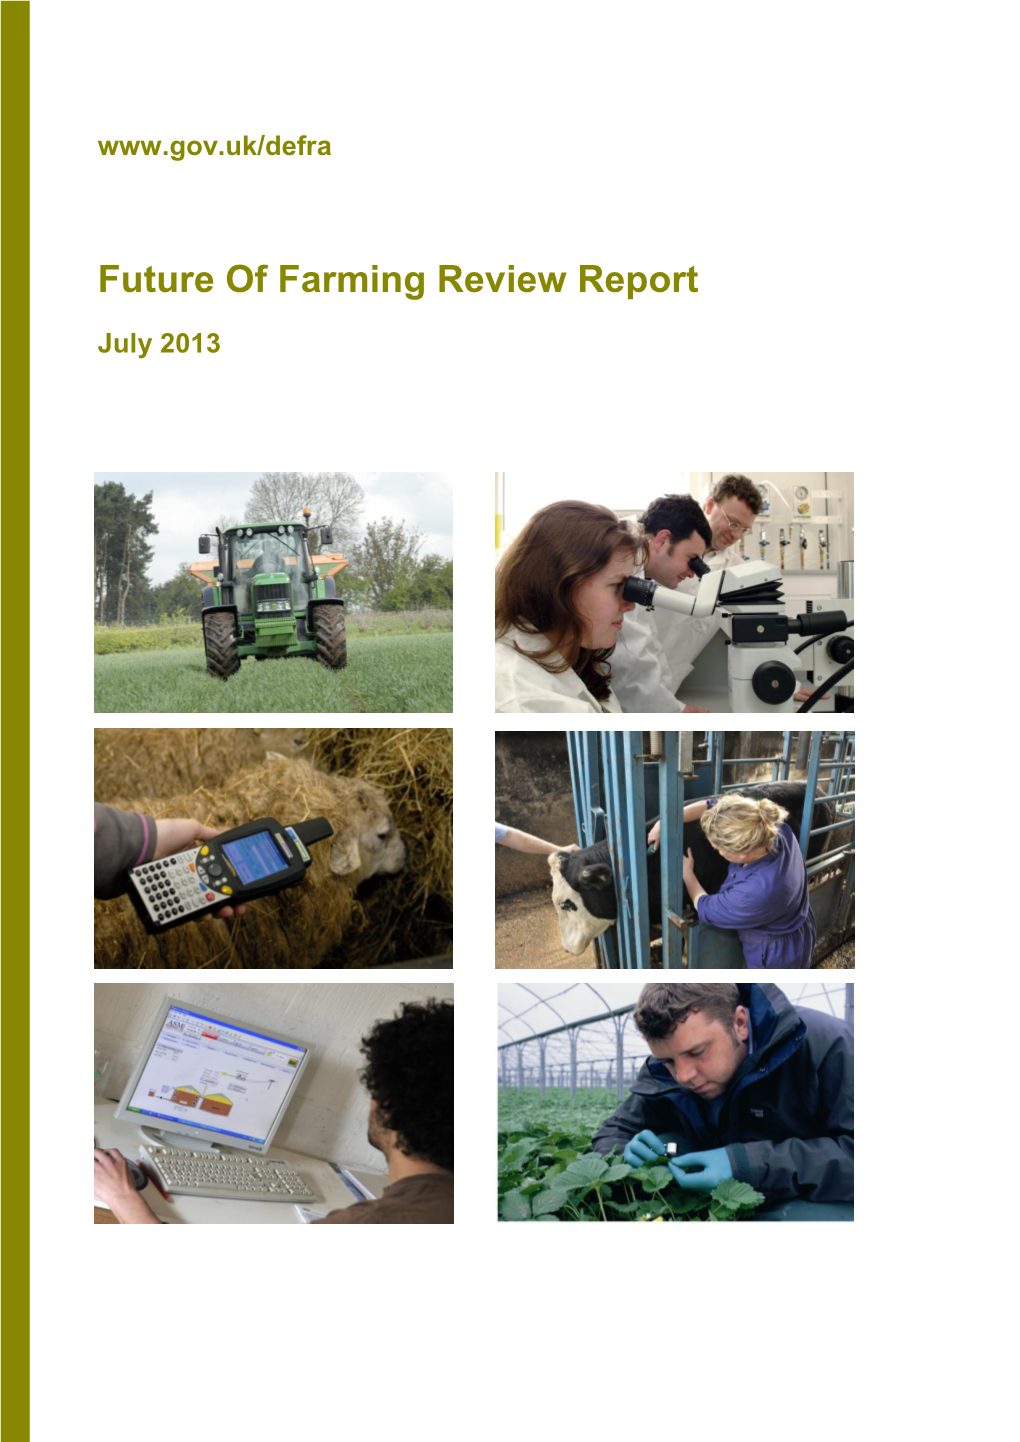 Future of Farming Review Report